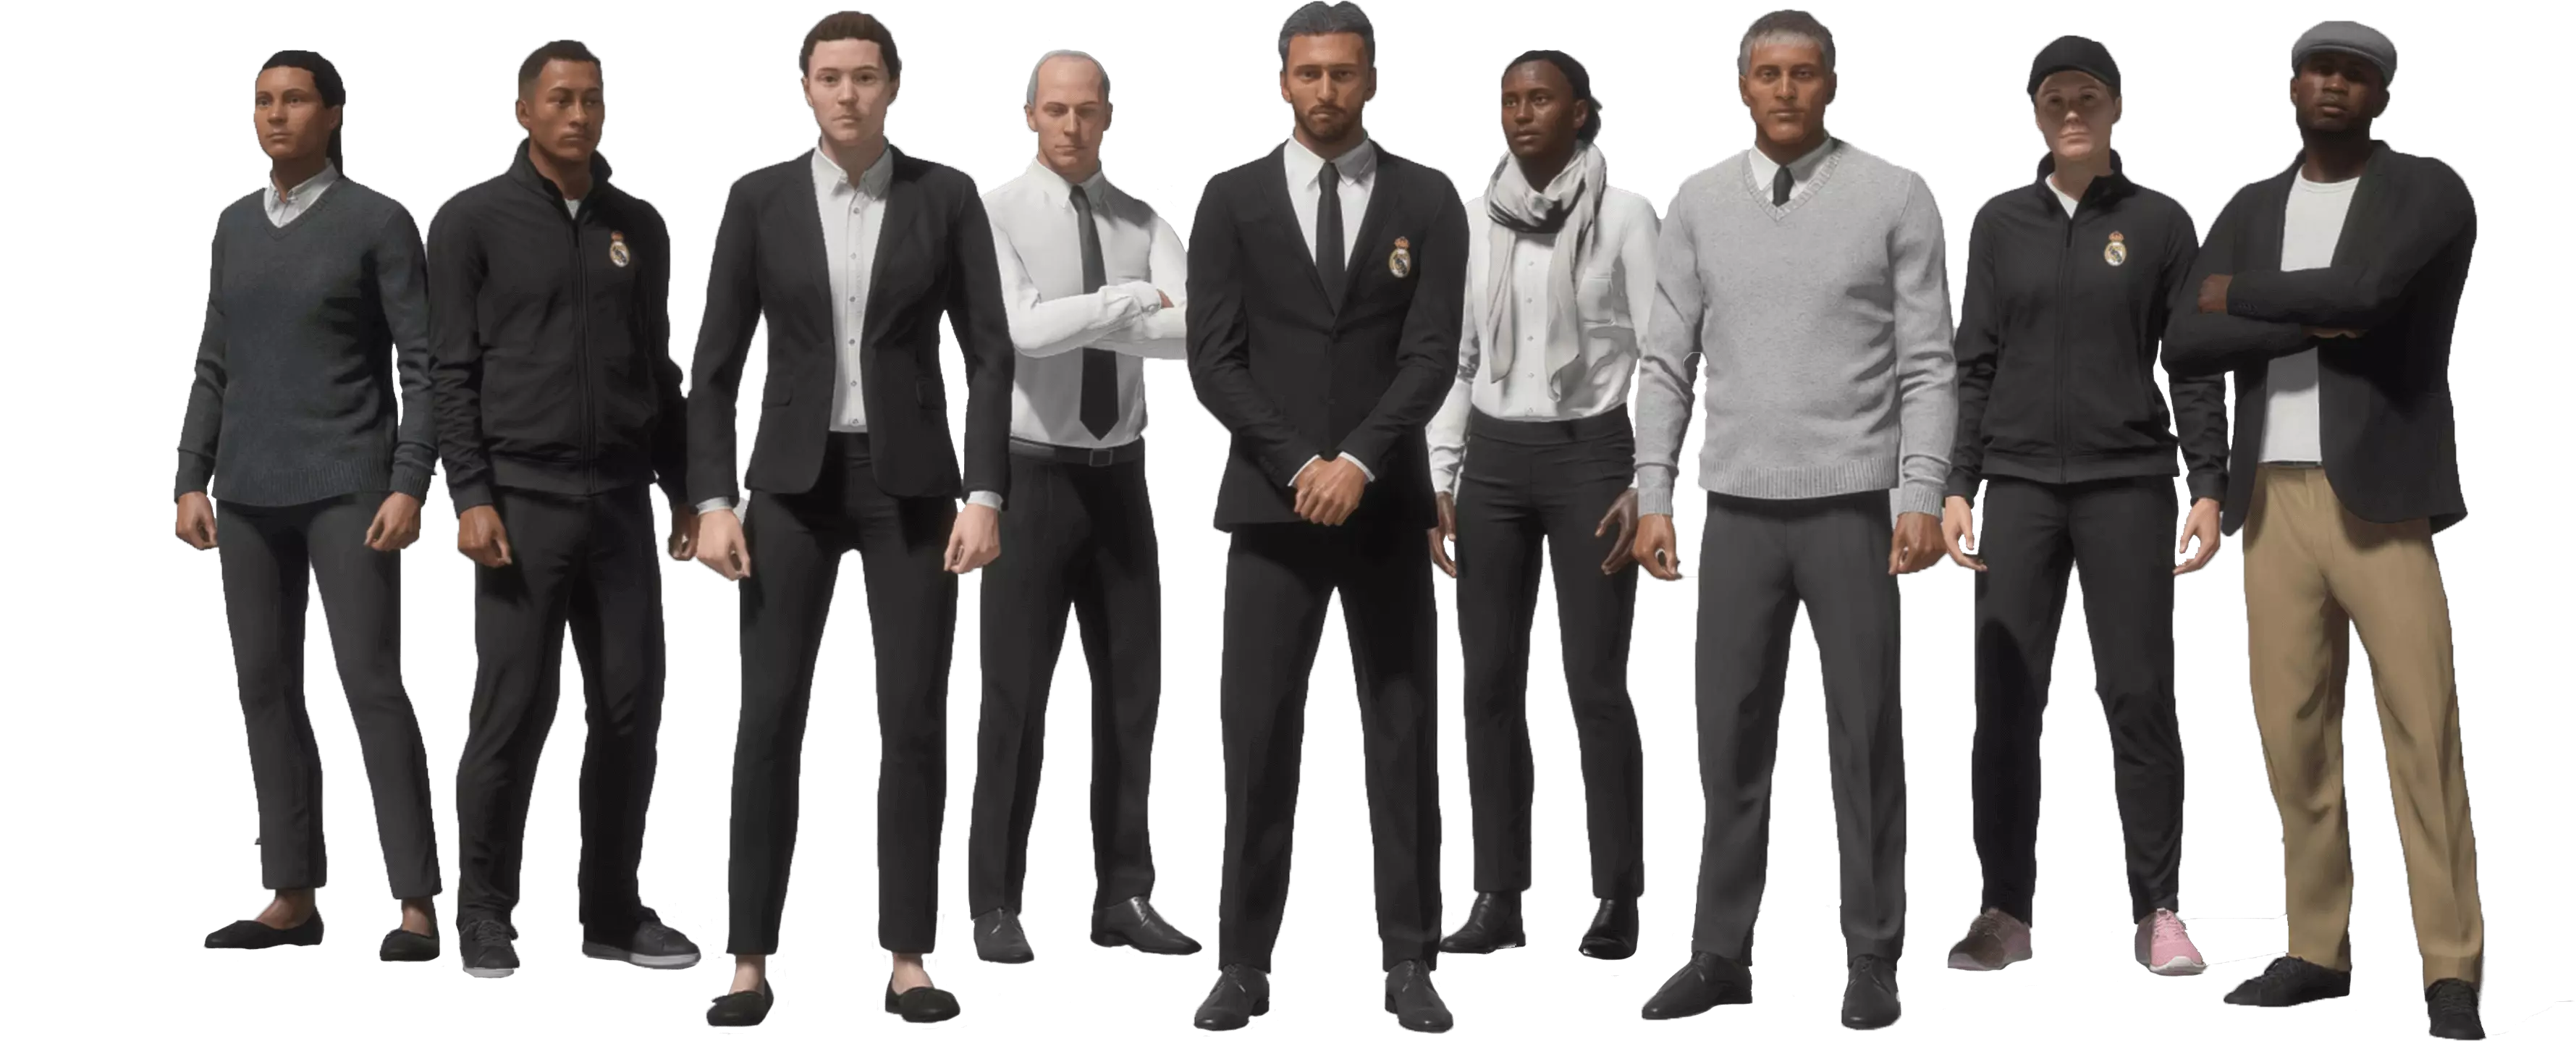 They'll be a wide array of manager 'looks' this year. Image: EA Sports